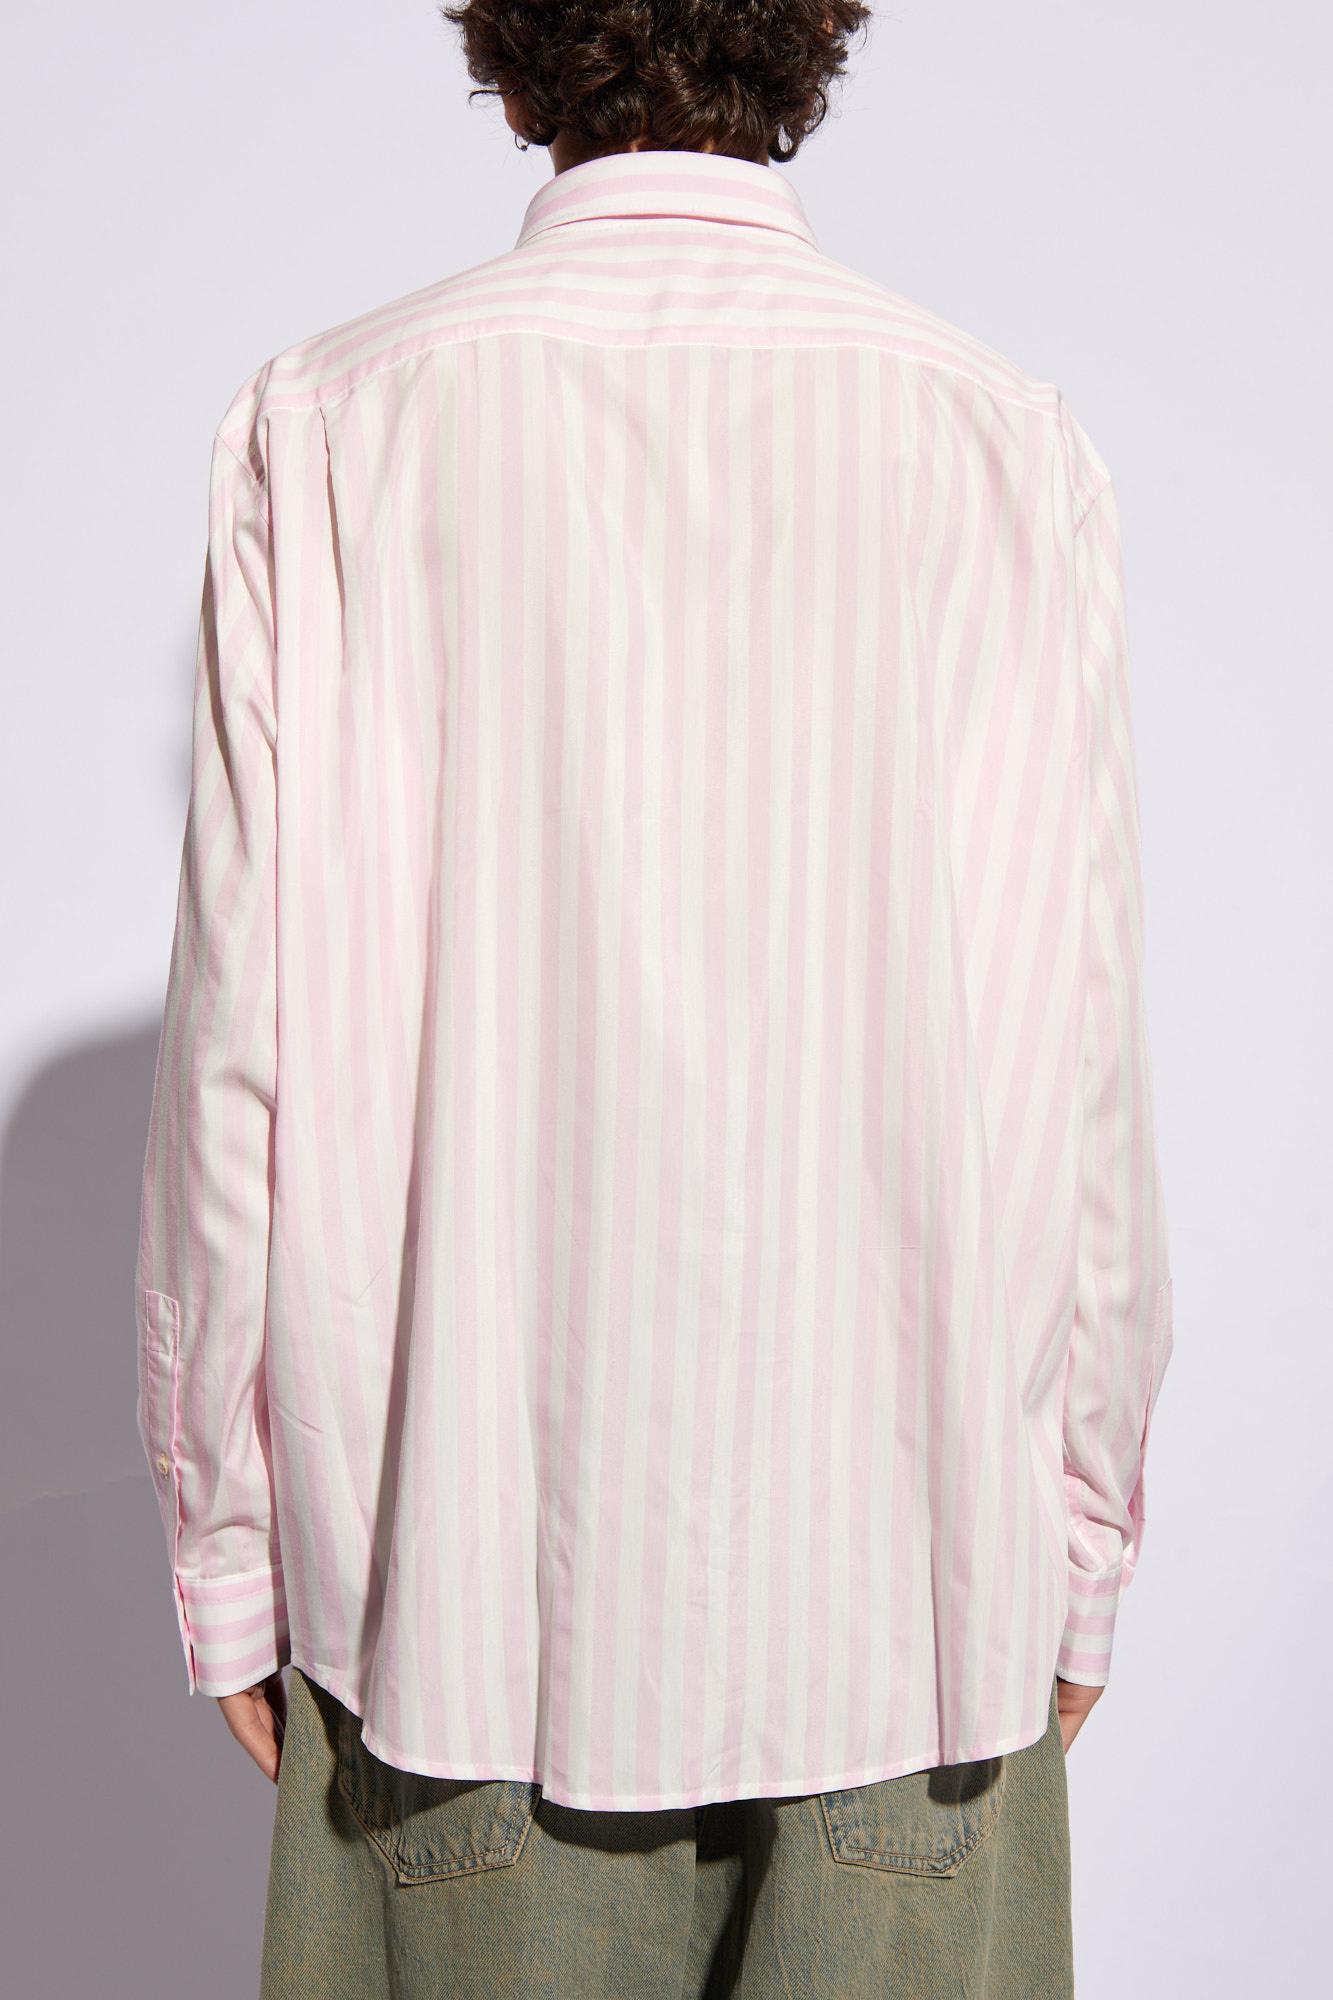 Shop Acne Studios Striped Shirt In Pink